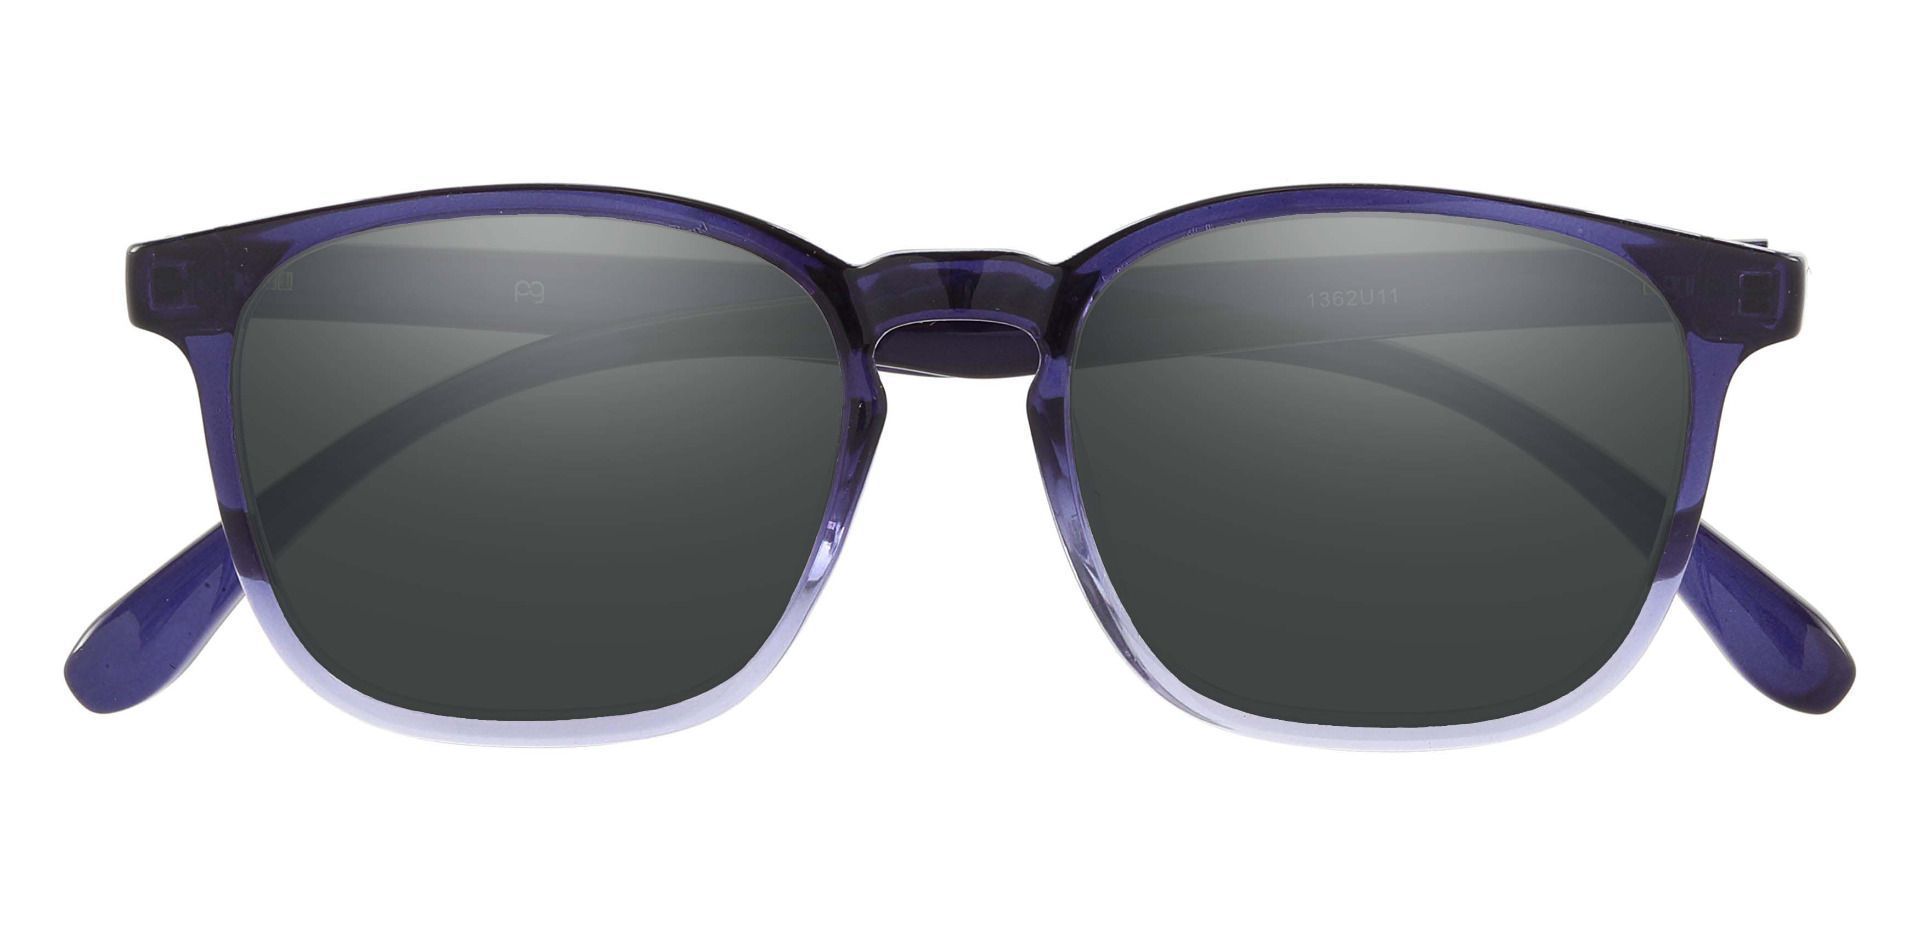 Gateway Square Non-Rx Sunglasses - Blue Frame With Gray Lenses